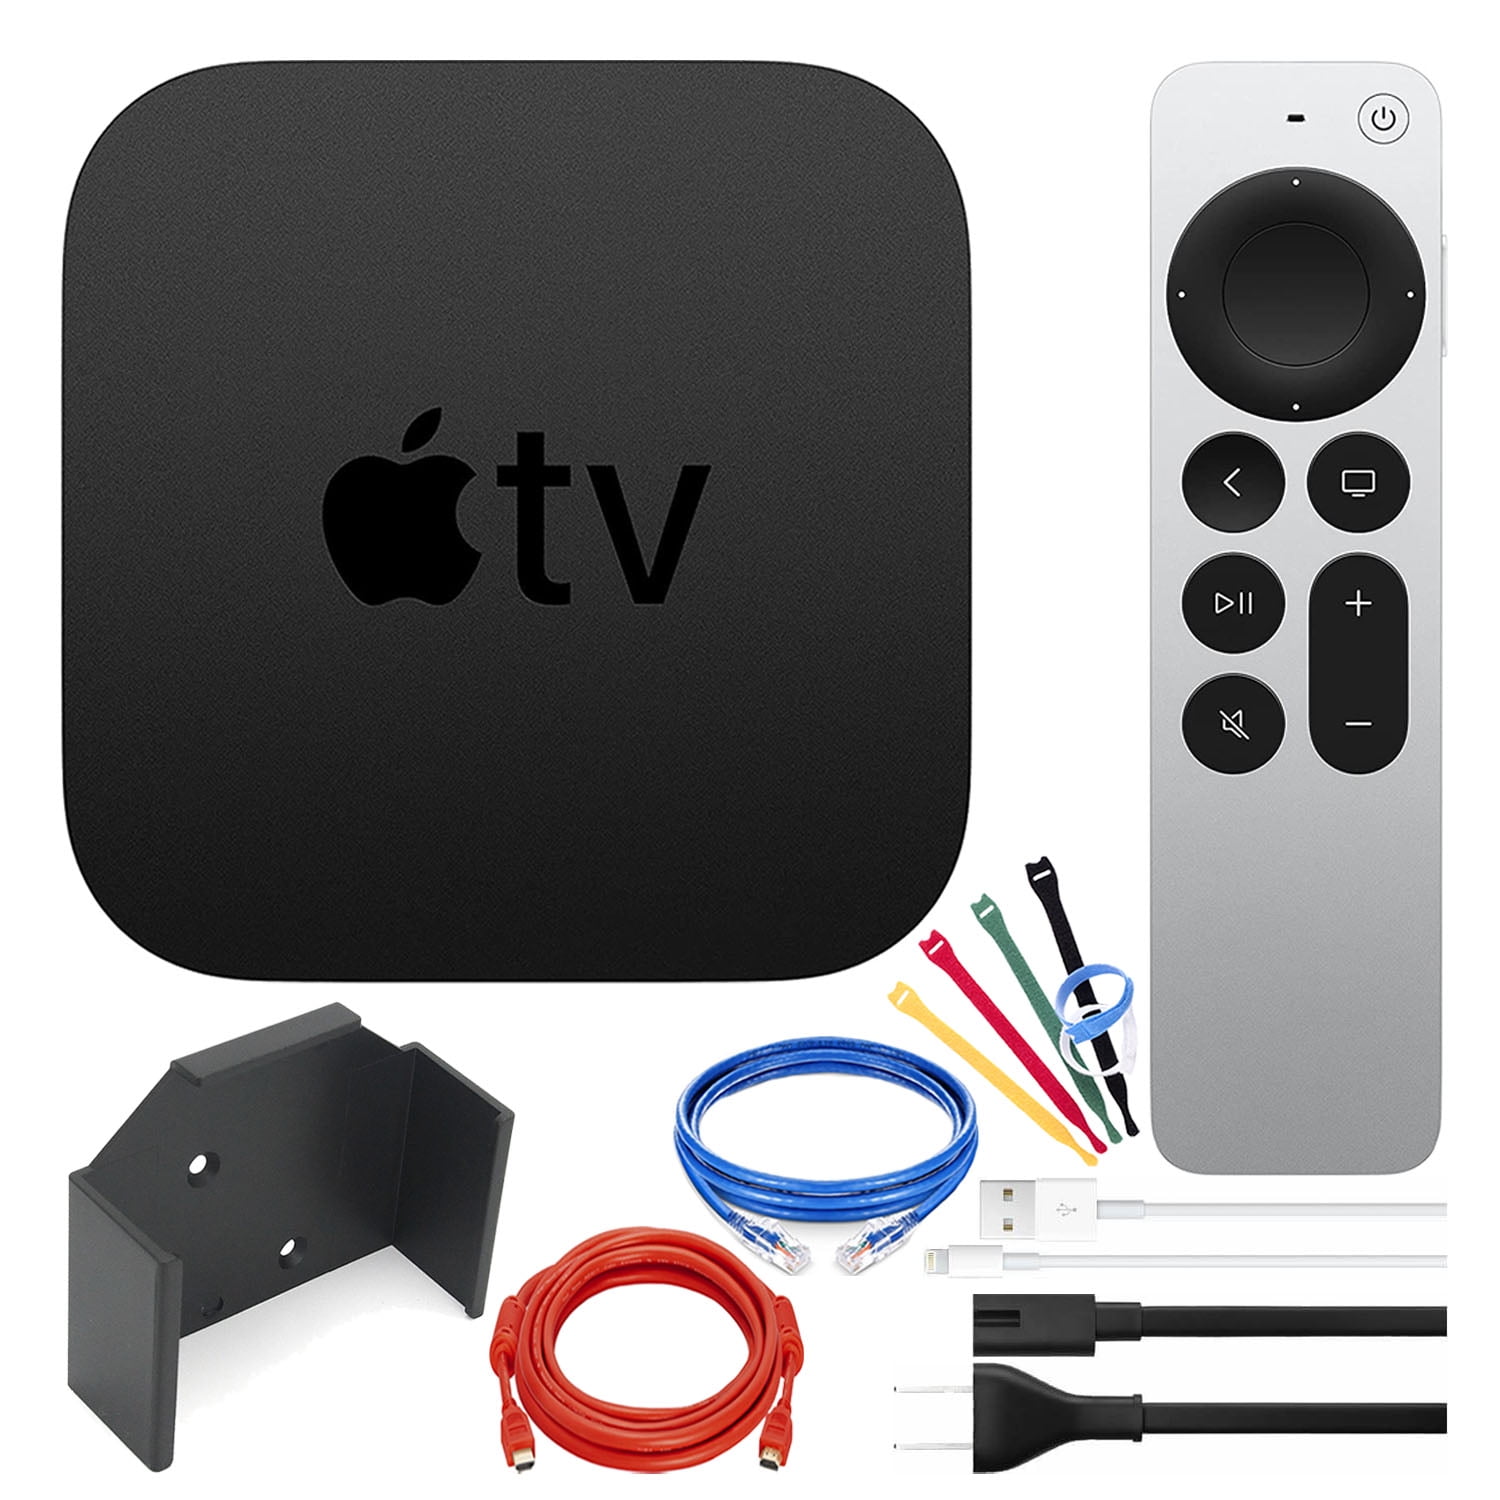 Apple TV 4K 32GB Streamer (2nd Generation) (MXGY2LL/A) (2021) Bundle with Wall Mount + Ethernet Cable + HDMI + (6) Cable Ties - Walmart.com